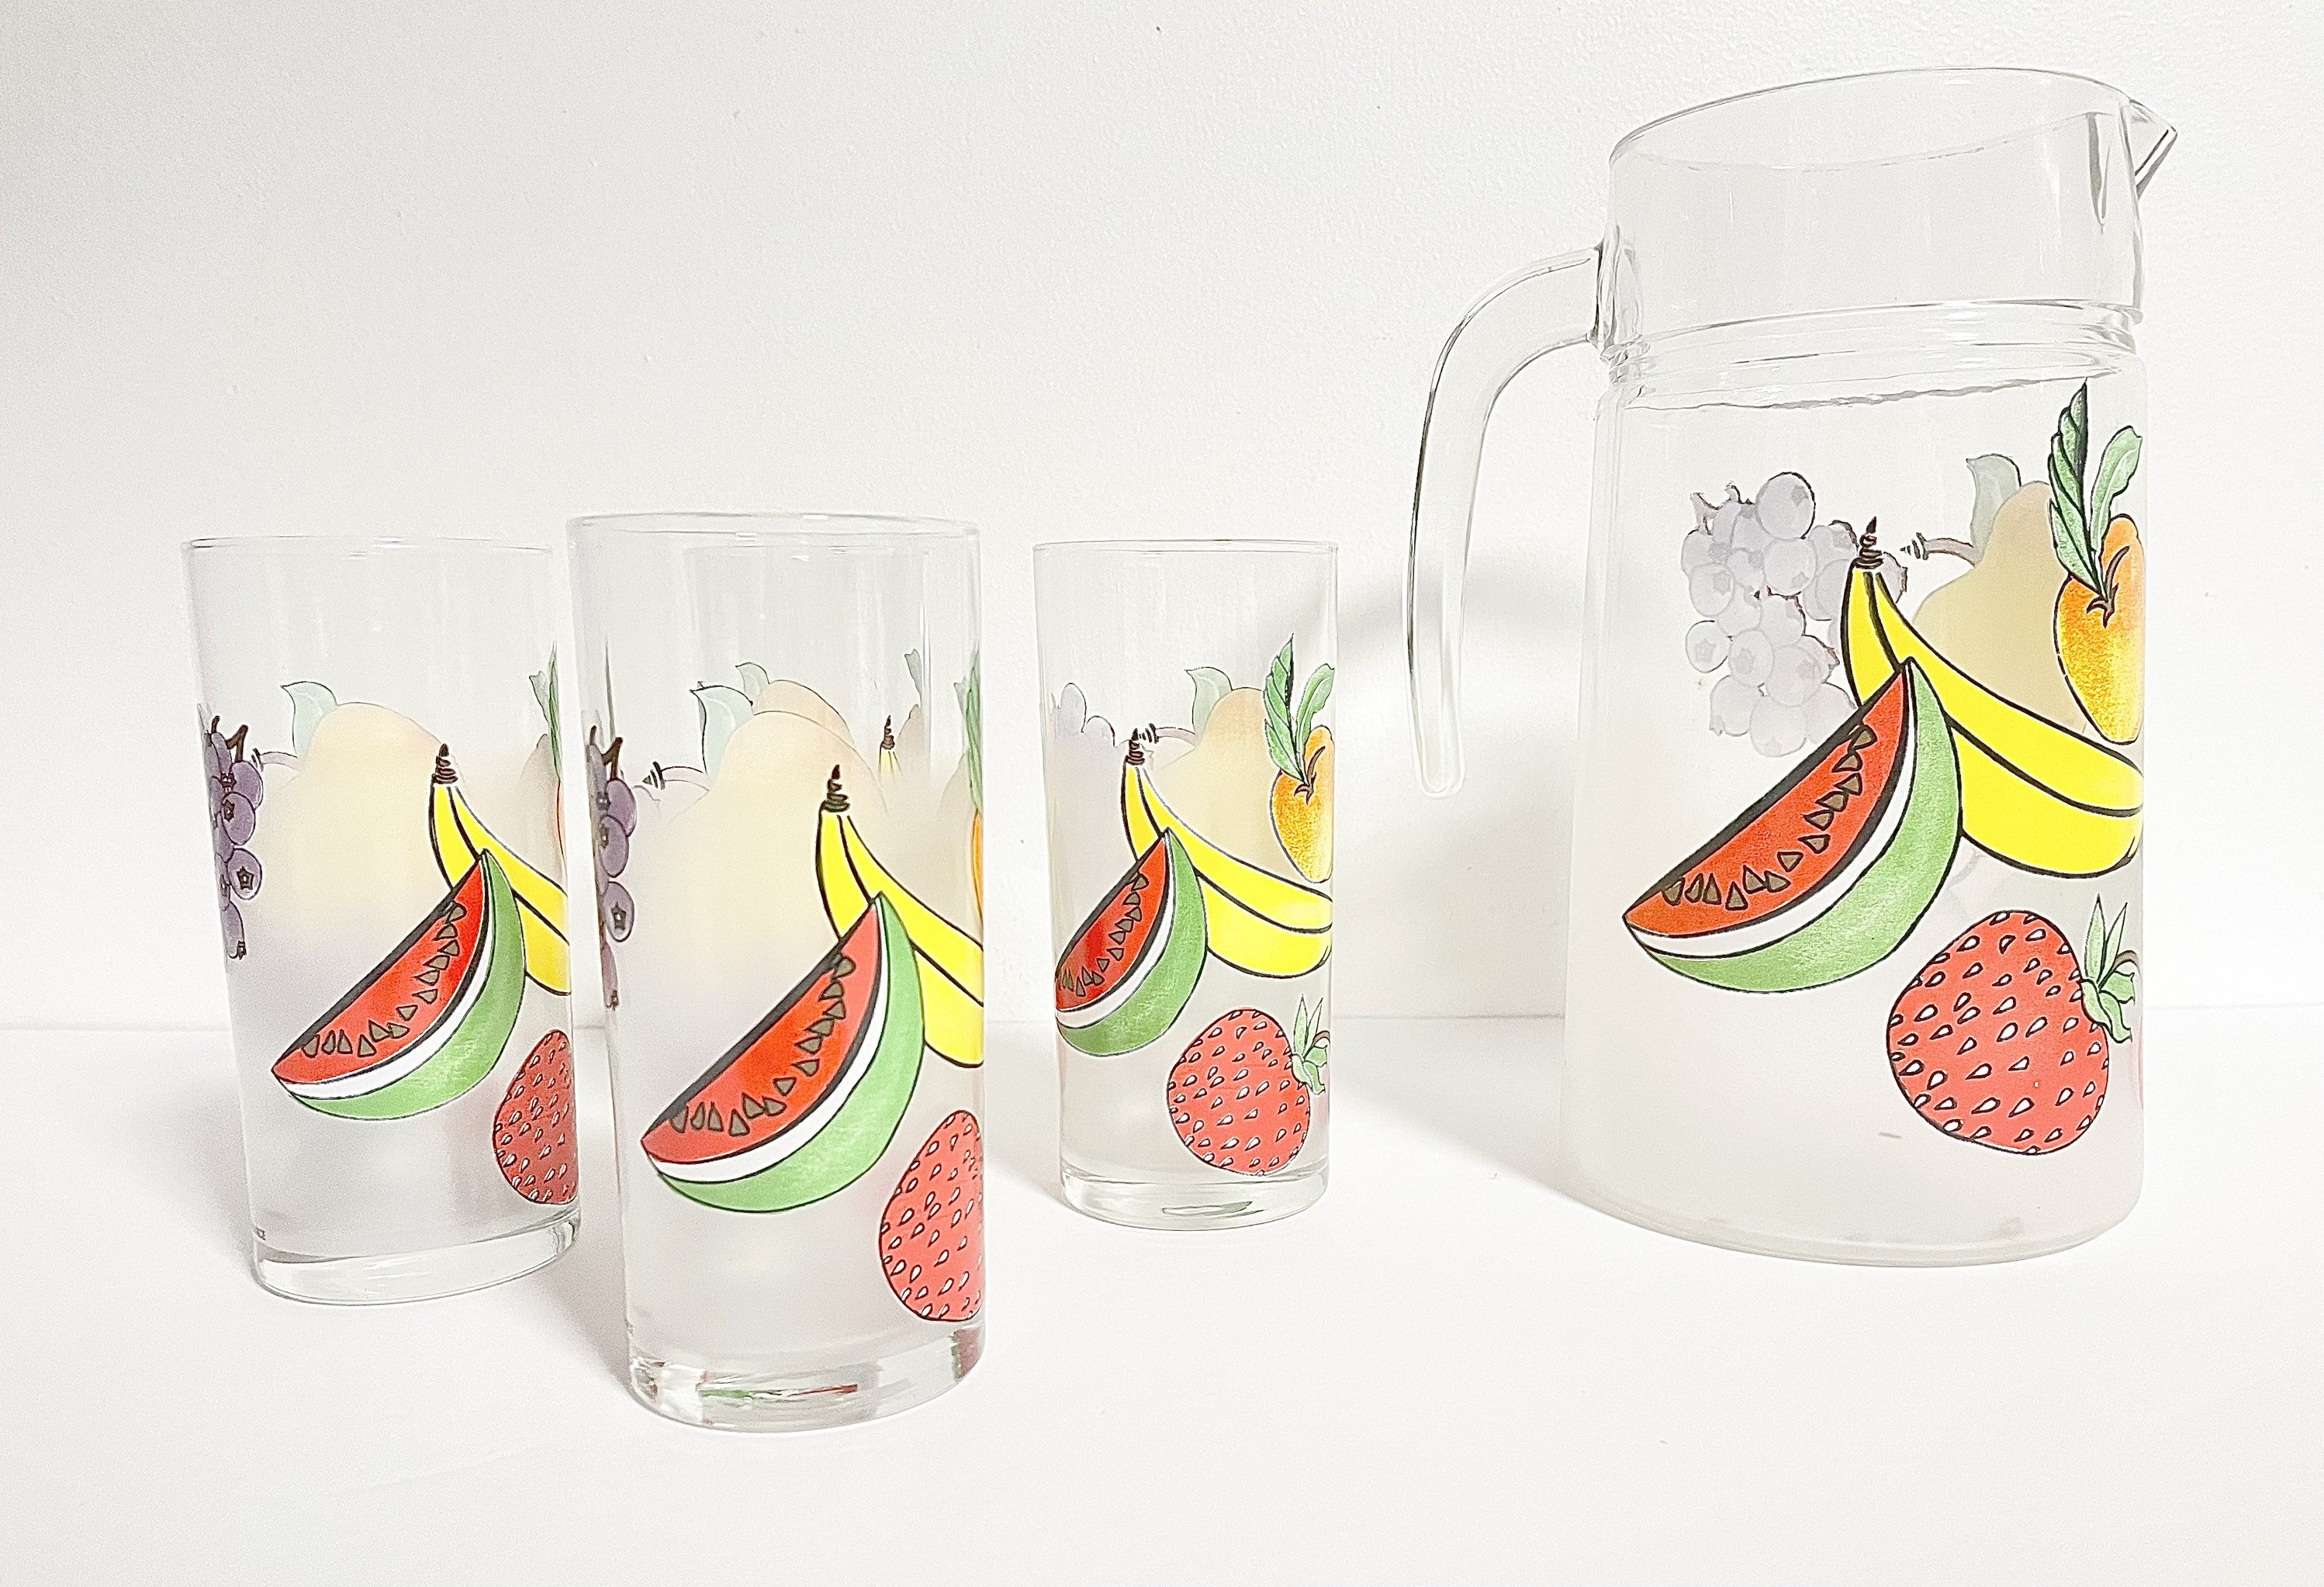 Vintage French Glass Juice Pitcher 6 Glasses, Colourful Fruit With Frosted  Glass, Summer Kitchen, 1980s 